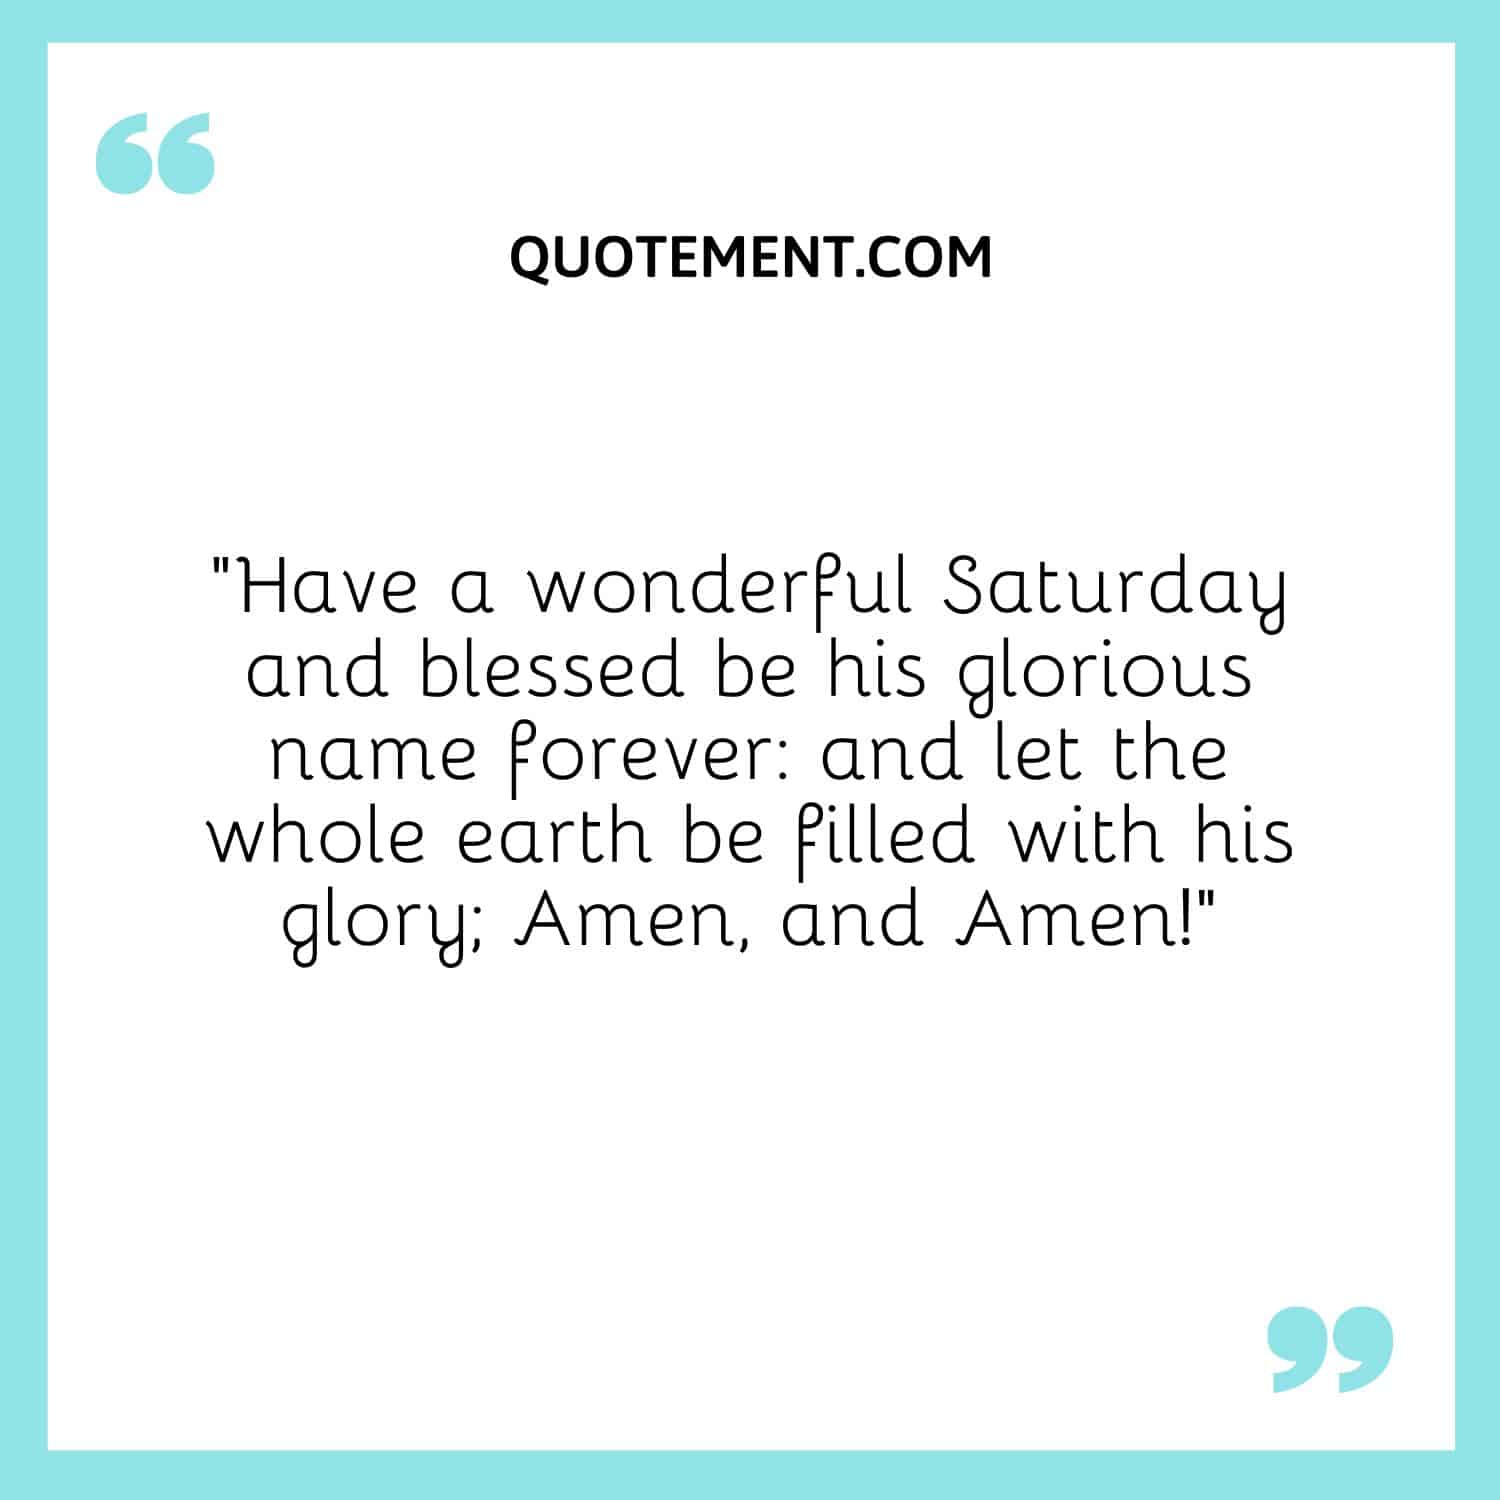 “Have a wonderful Saturday and blessed be his glorious name forever and let the whole earth be filled with his glory; Amen, and Amen!”